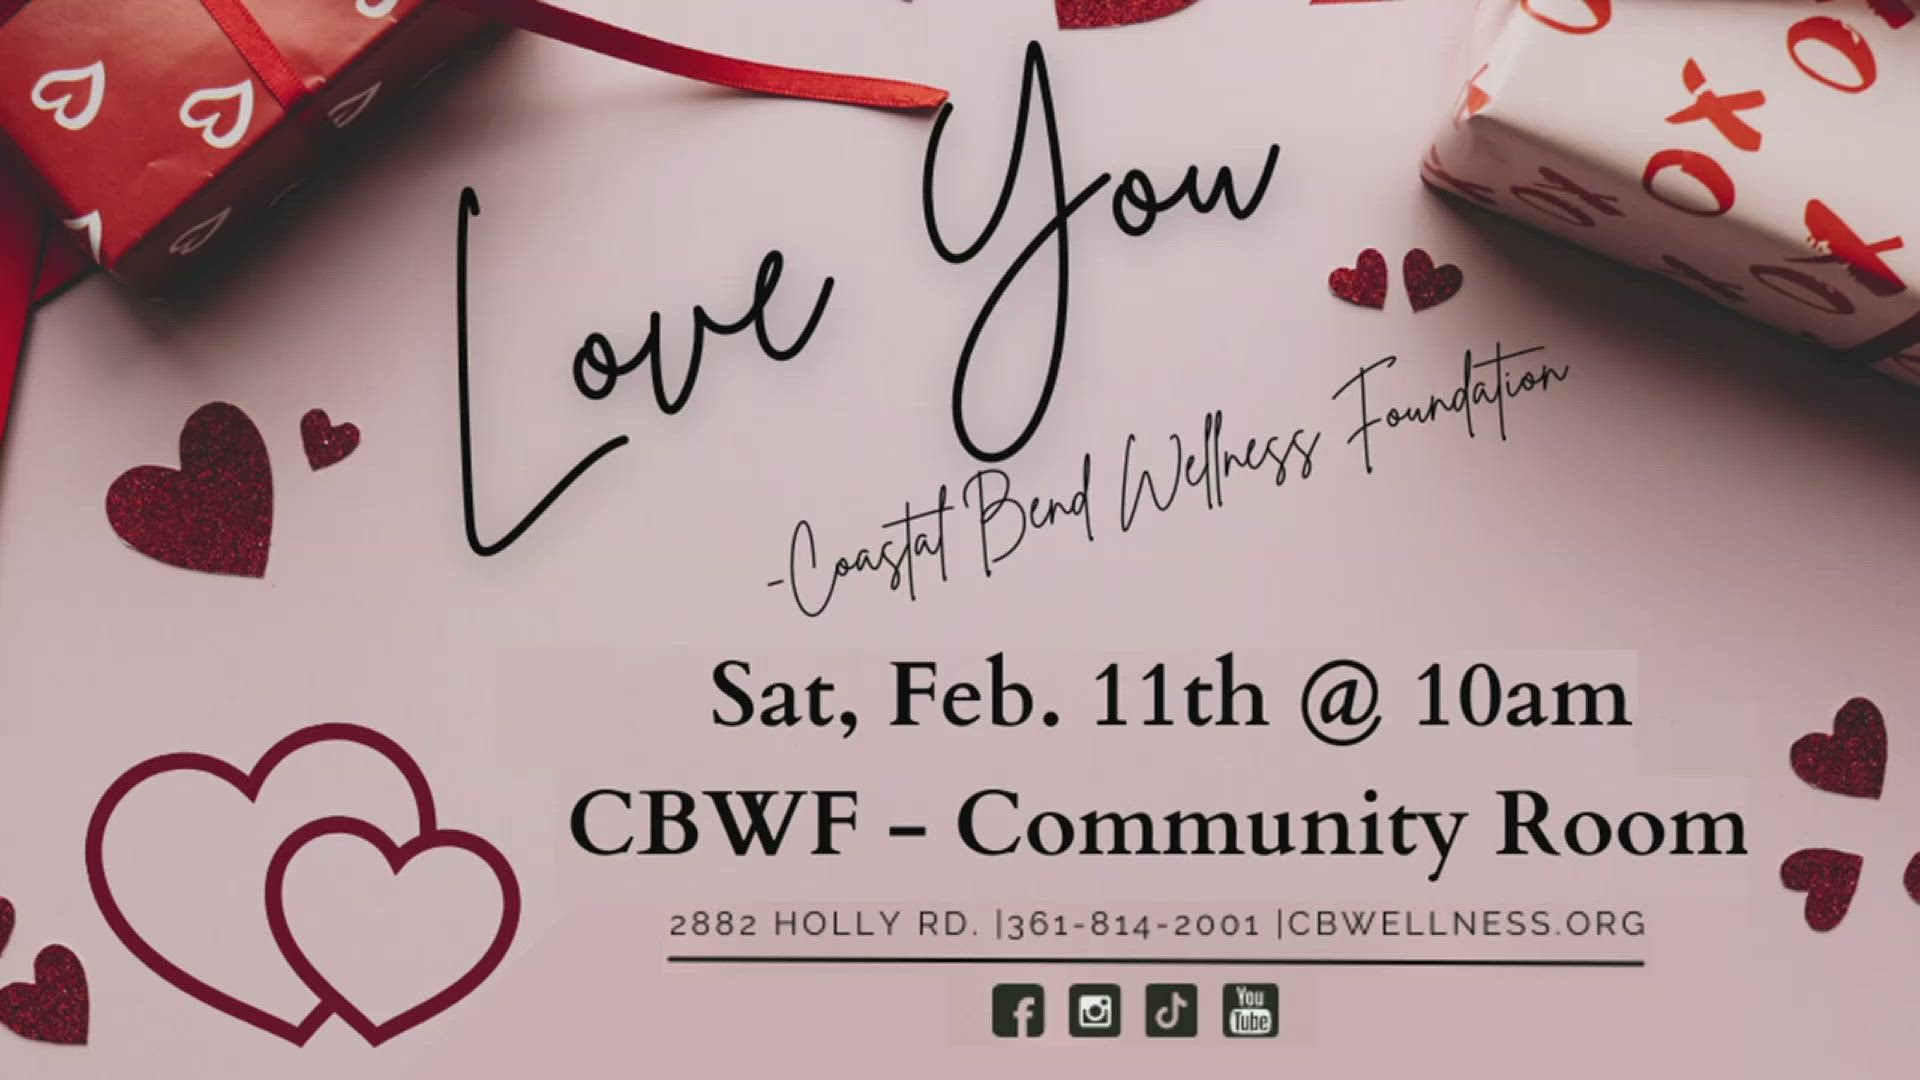 Michaela Flores of the Coastal Bend Wellness Foundation joined us live to share how you can show yourself love through their "Love You" self-care event.